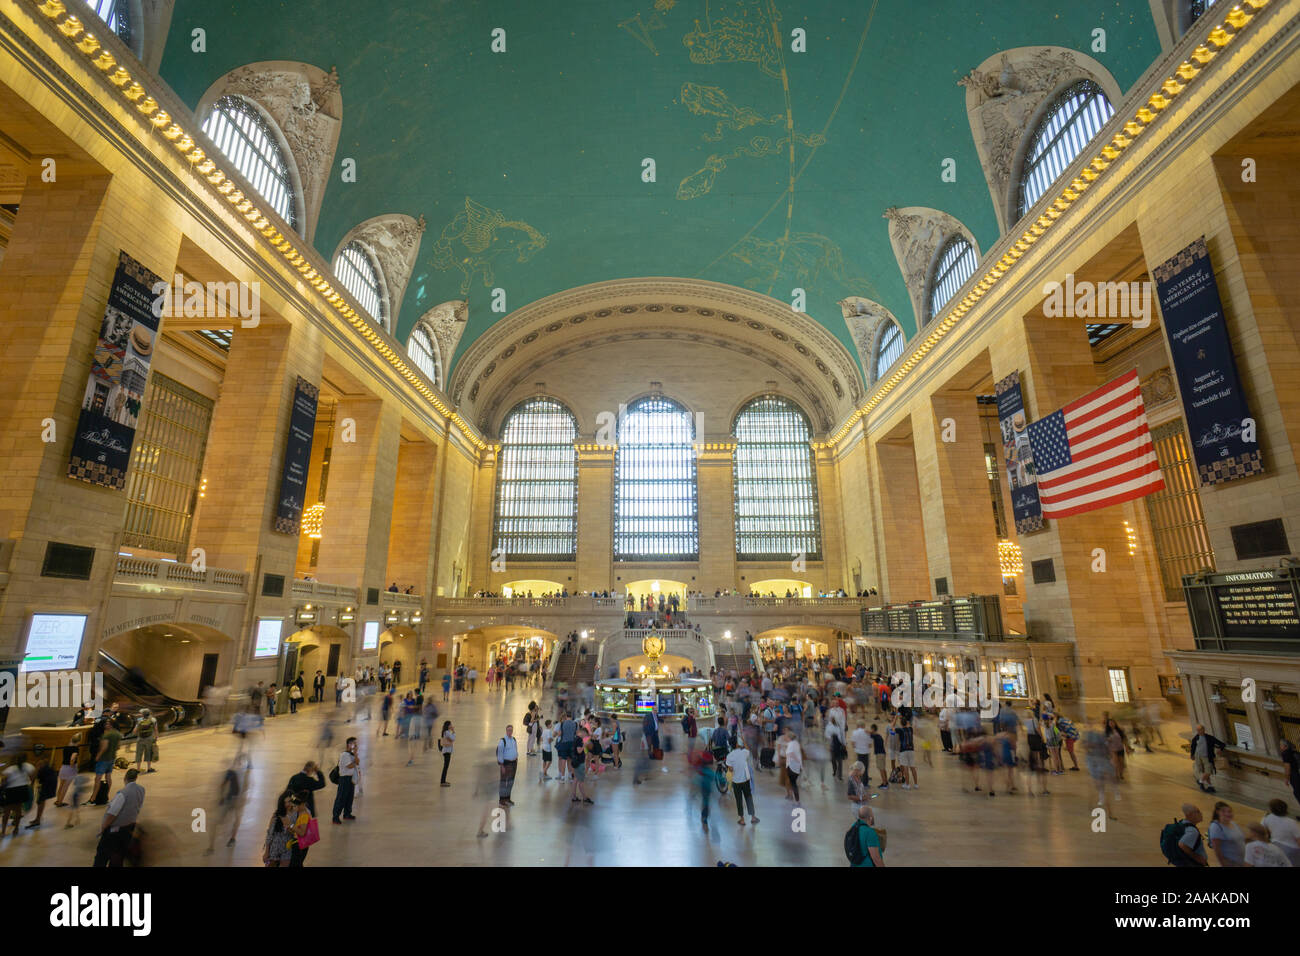 New York, USA - August 20, 2018: Inside view of the main hall of Grand Central Terminal Station with many peoples in motion. Stock Photo